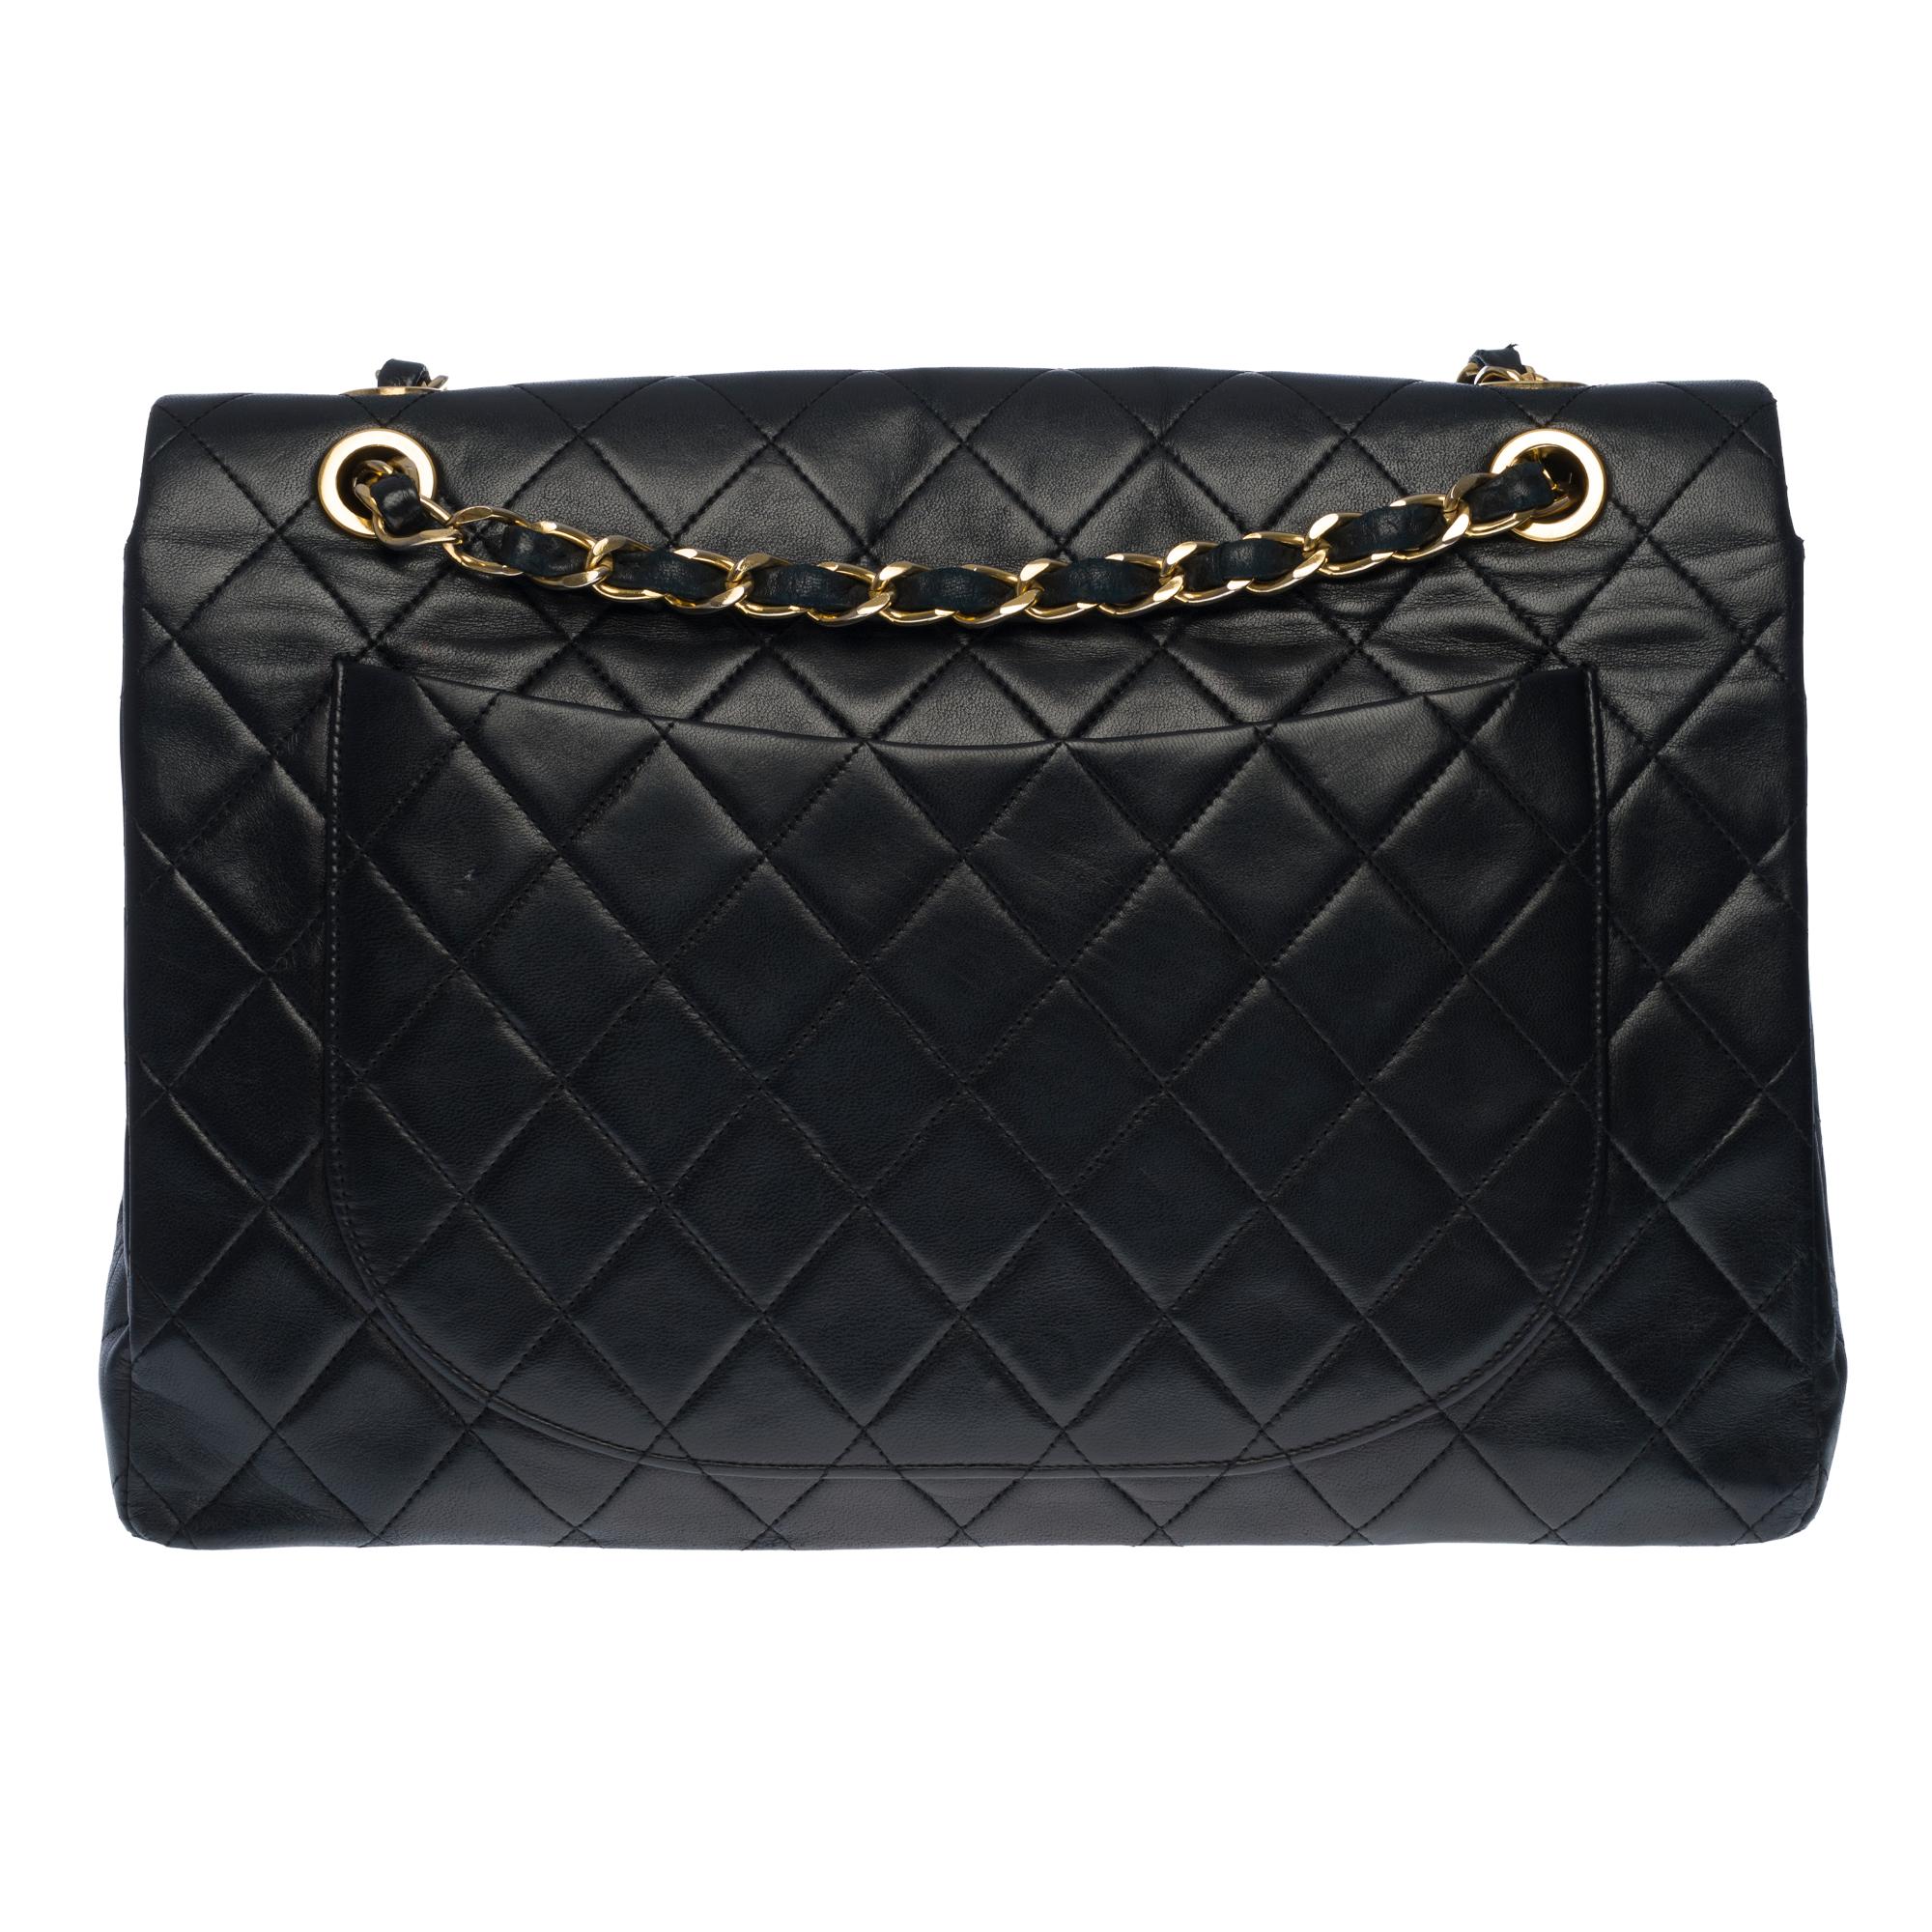 The Majestic Chanel Timeless Jumbo Handbag with simple flap in black quilted lambskin leather, gold-tone metal hardware, a gold-tone metal chain handle interwoven with black leather allowing a hand or shoulder or shoulder strap.

Closure with gold